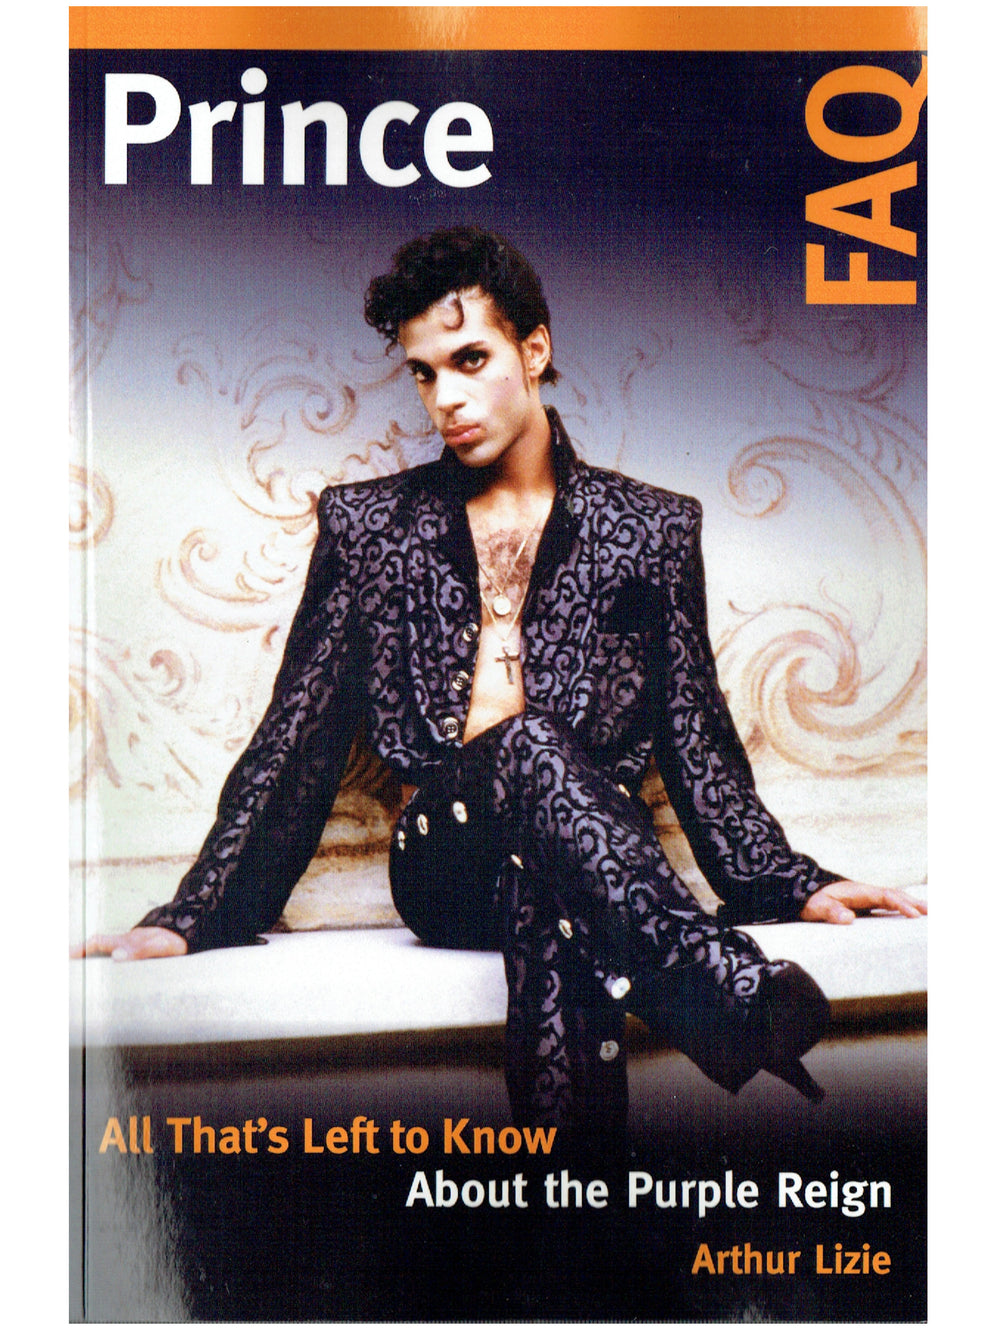 Prince – FAQ All That's Left To Know About the Purple Reign Softbacked Book NEW